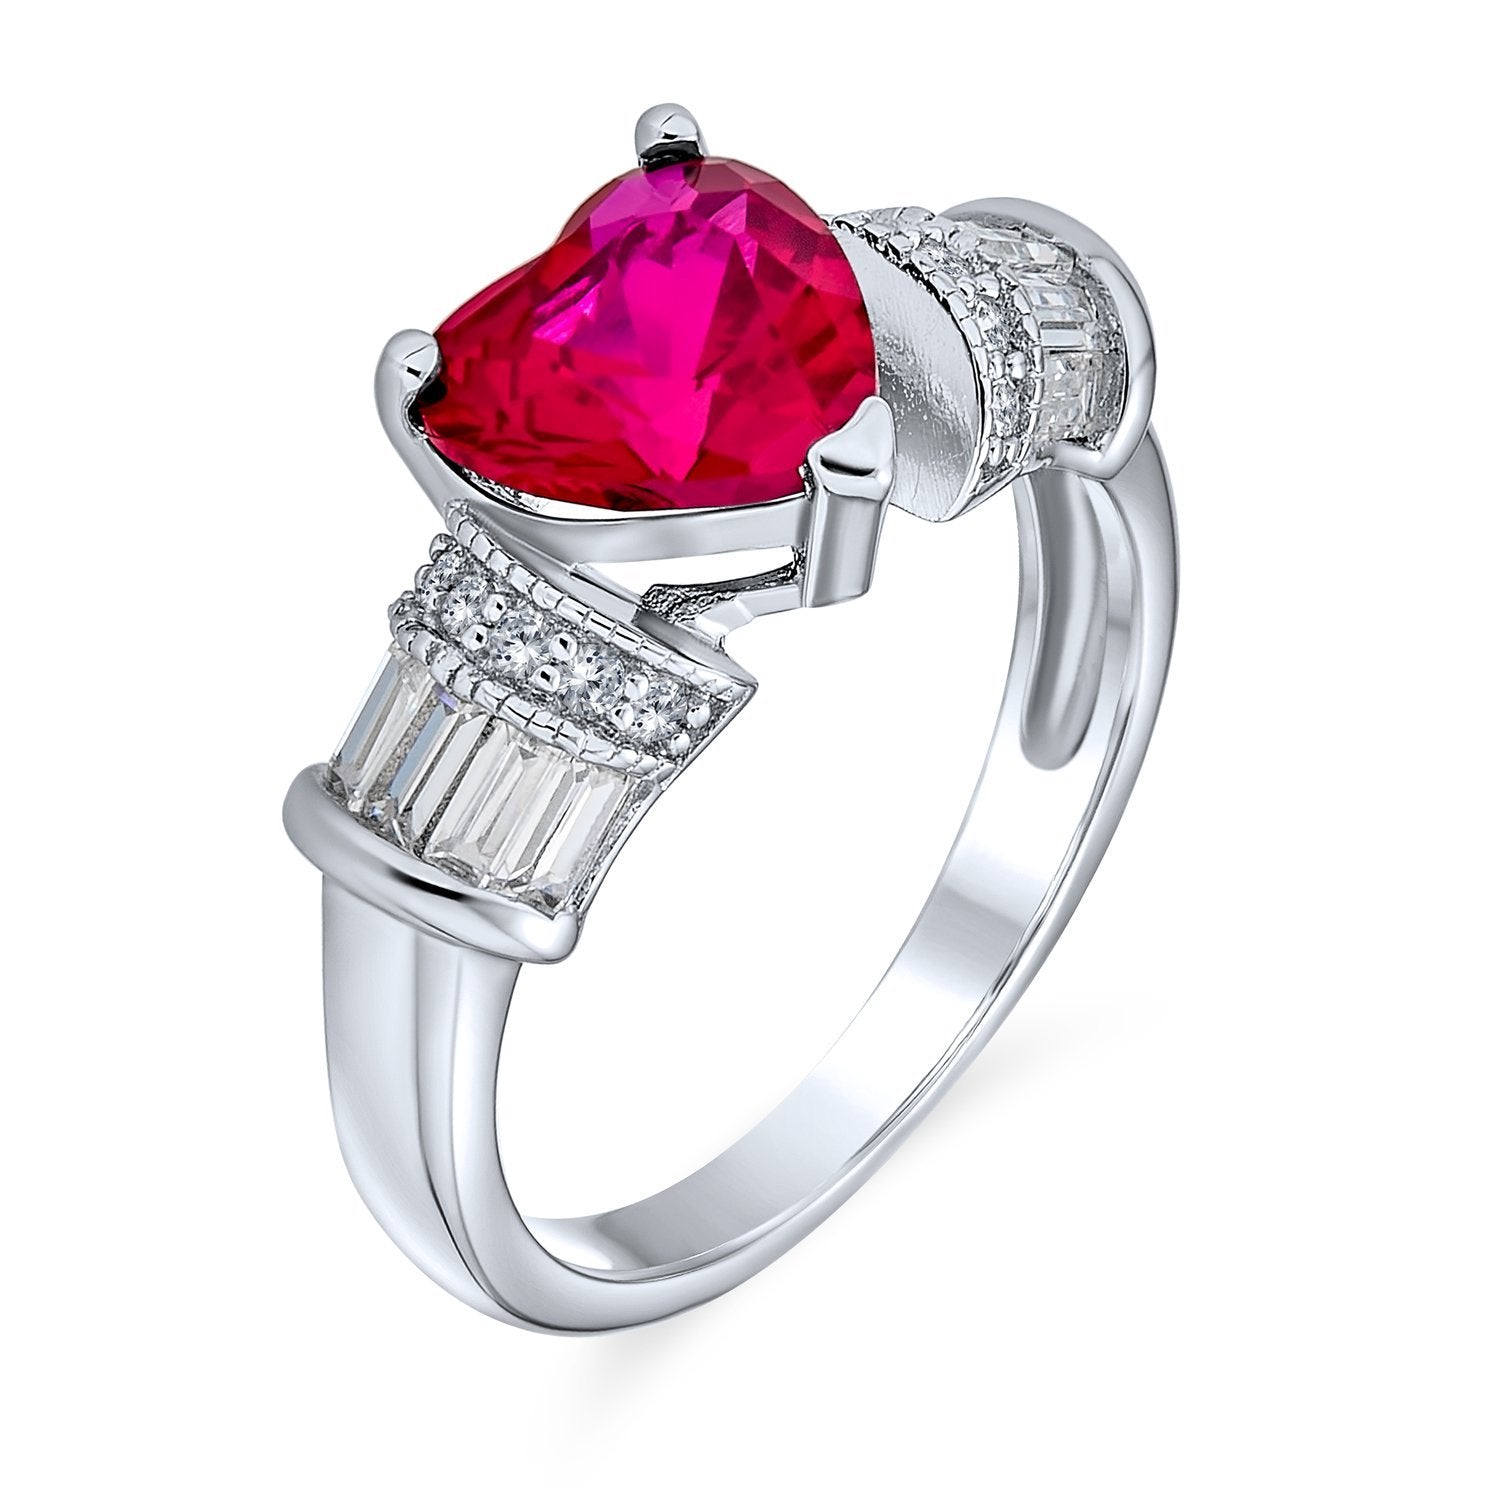 3CT Pink Heart Shape CZ Engagement Ring Simulated Ruby Sterling Silver - Joyeria Lady